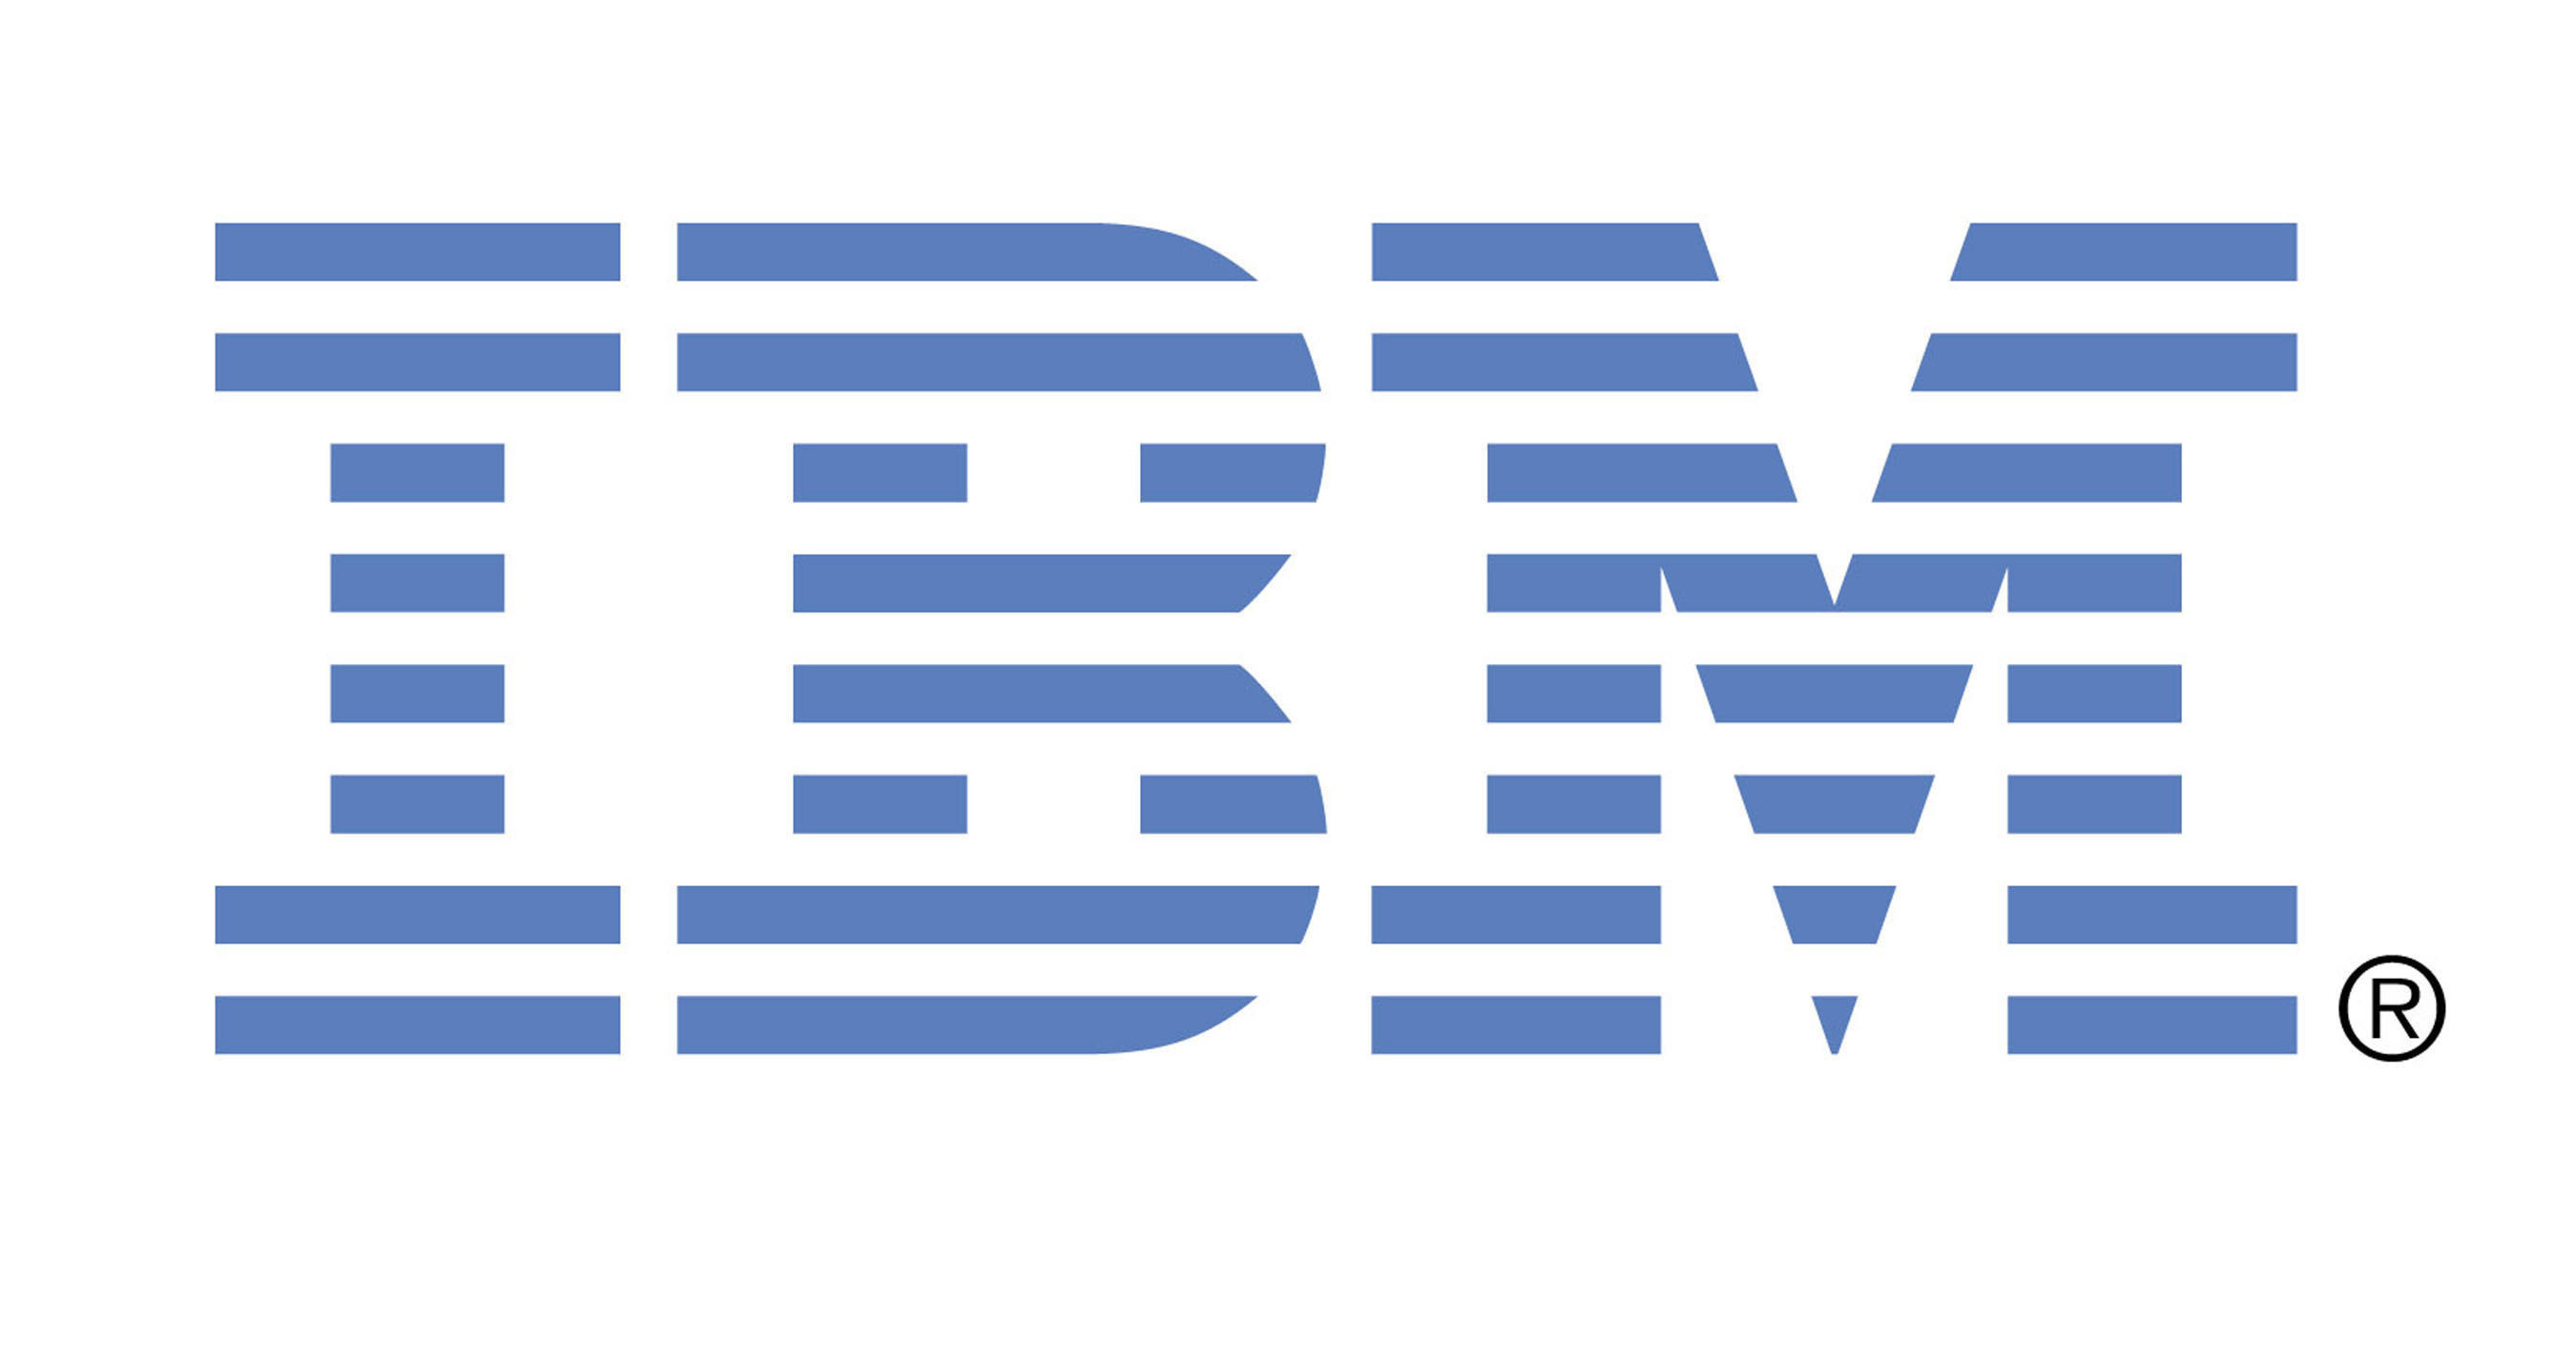 An image of the IBM logo